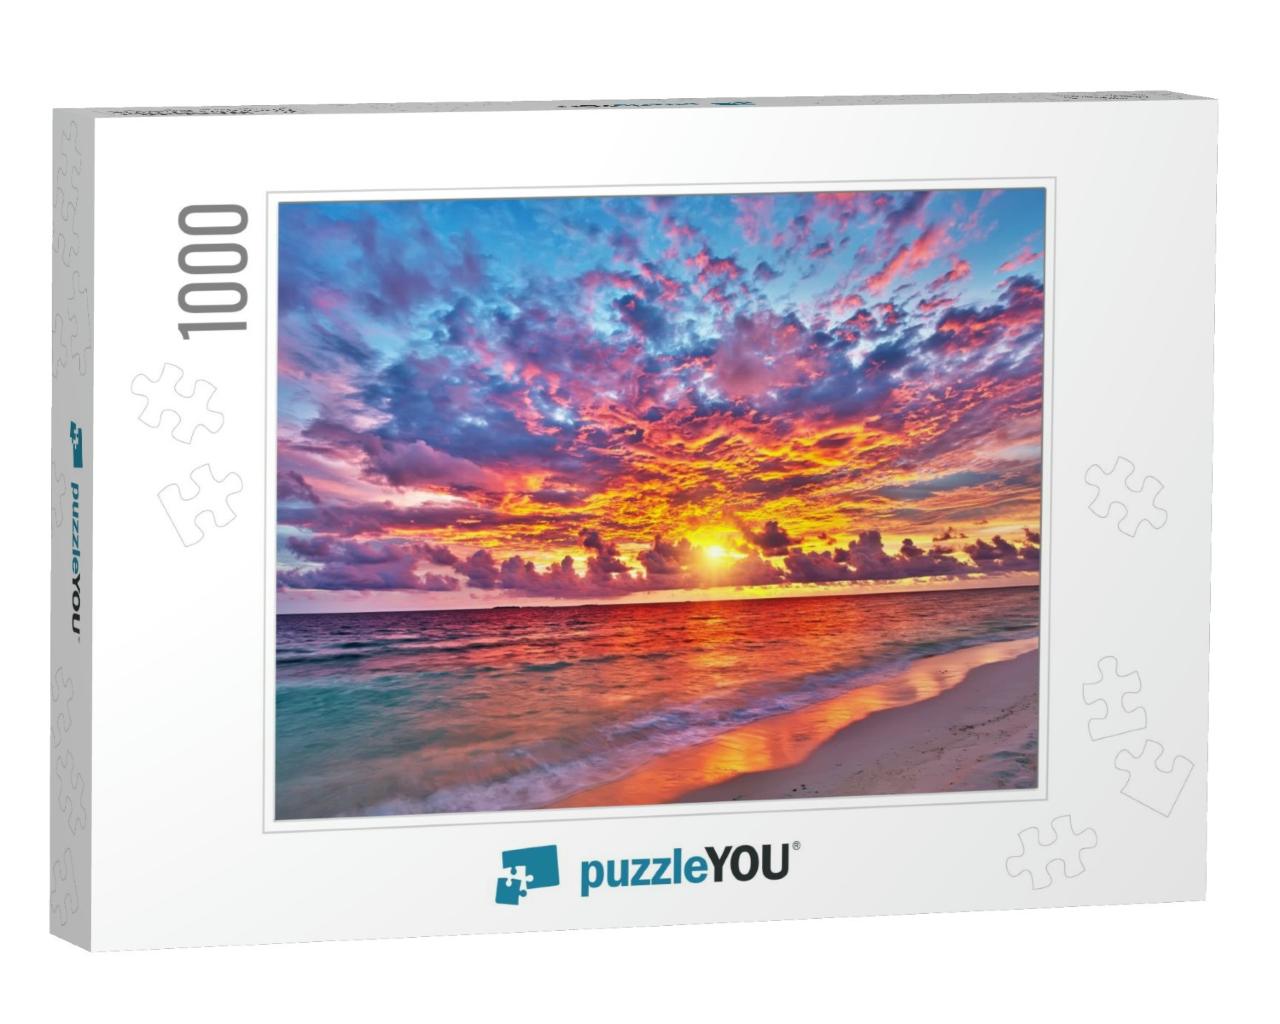 Colorful Sunset Over Ocean on Maldives... Jigsaw Puzzle with 1000 pieces